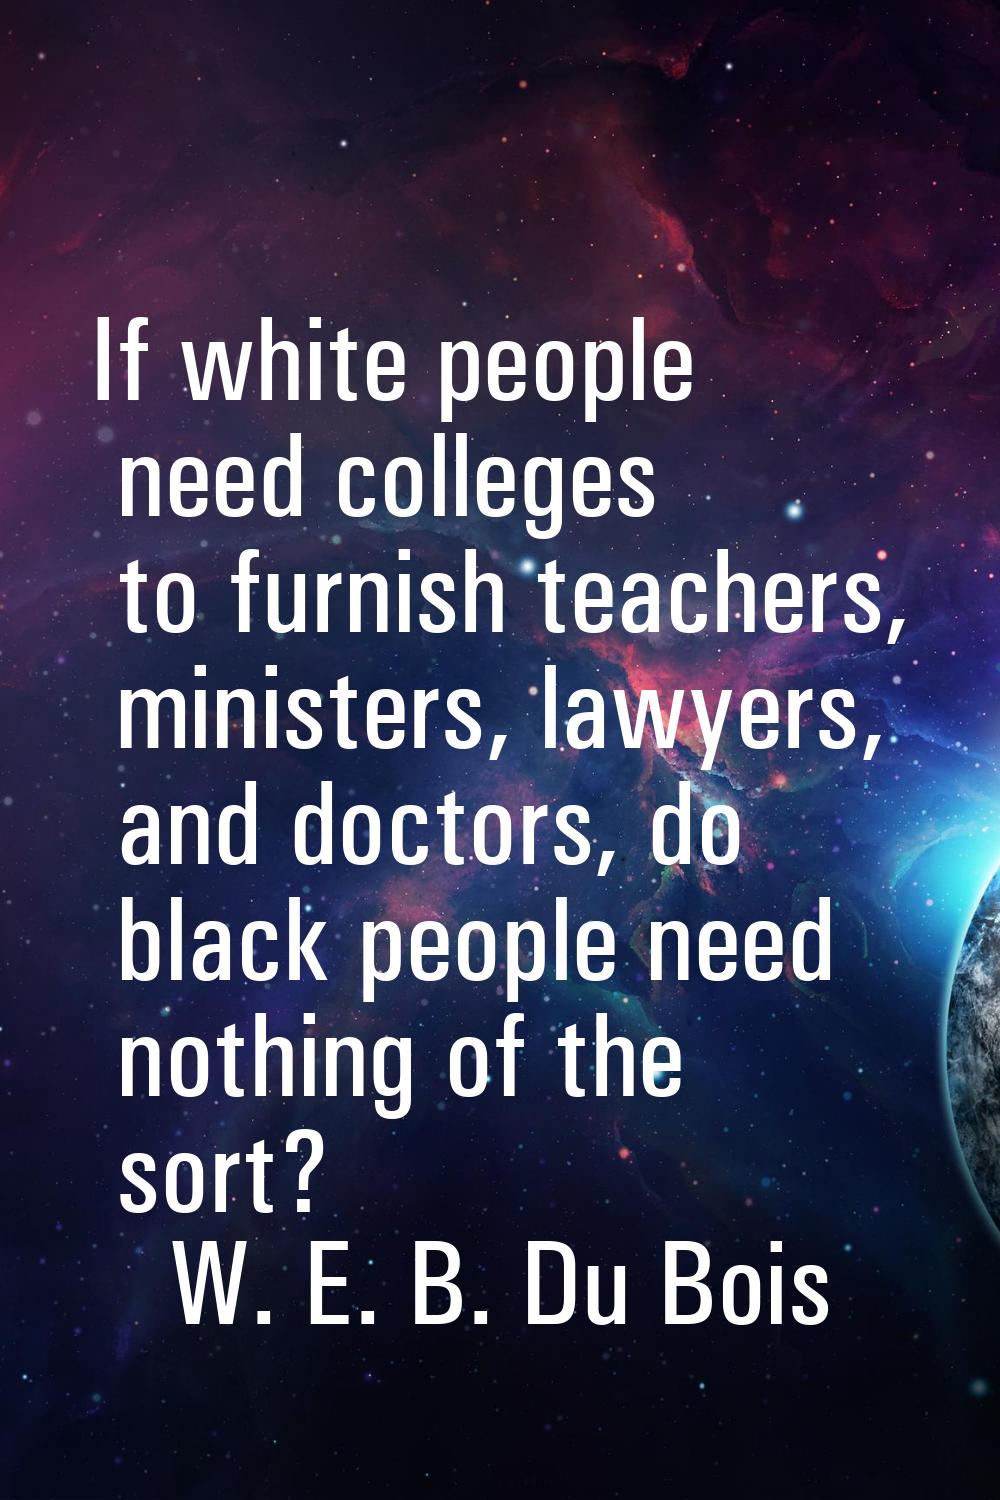 If white people need colleges to furnish teachers, ministers, lawyers, and doctors, do black people